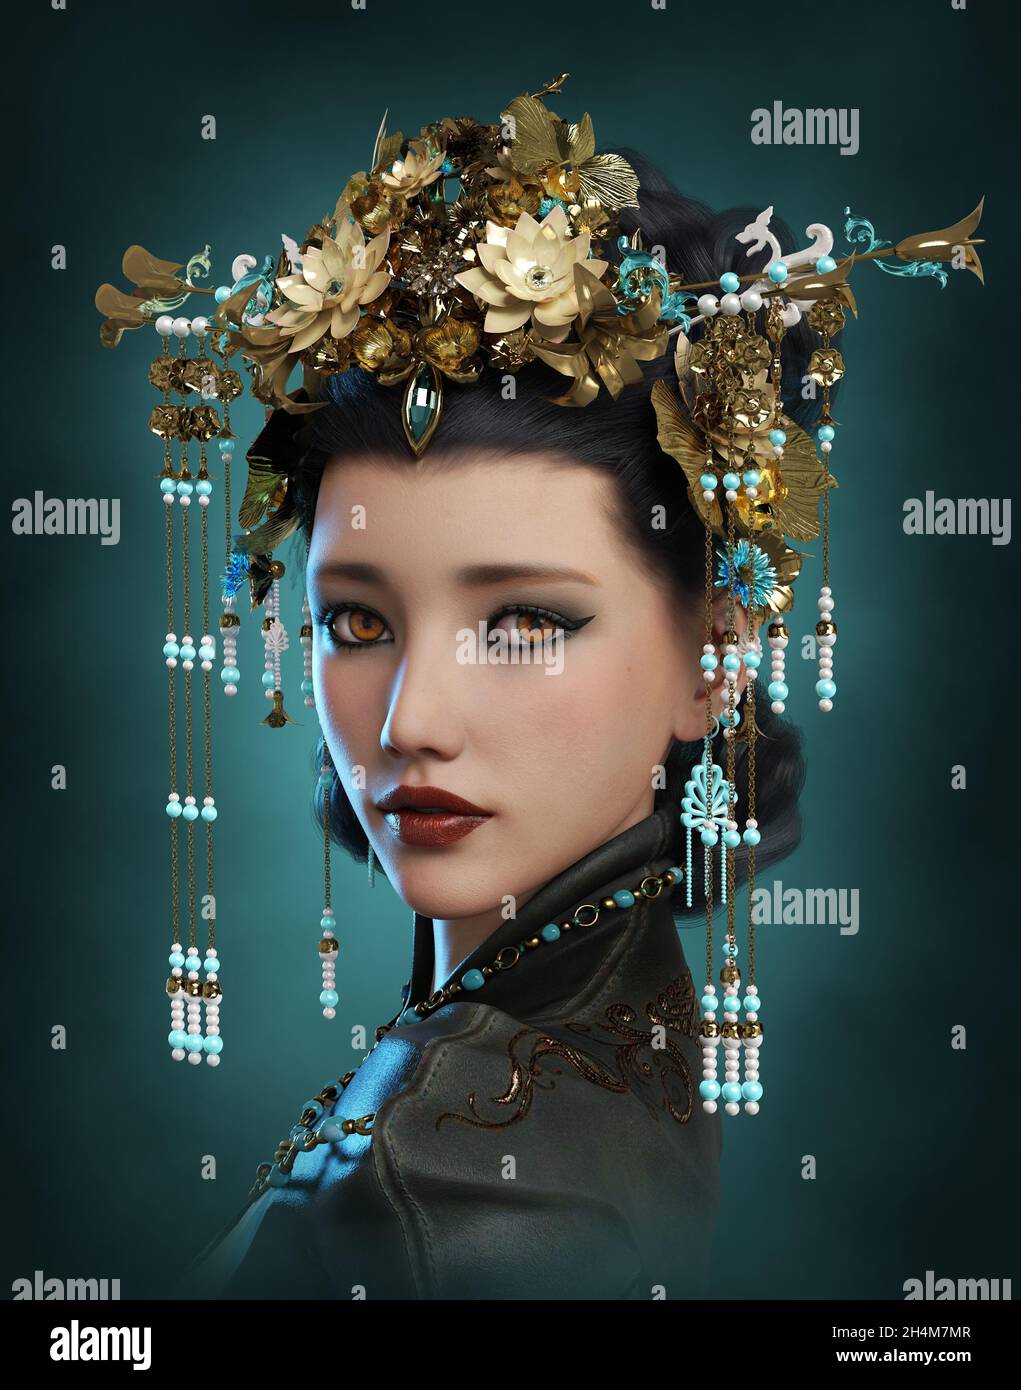 3d computer graphics of a portrait of a girl with an oriental headdress Stock Photo